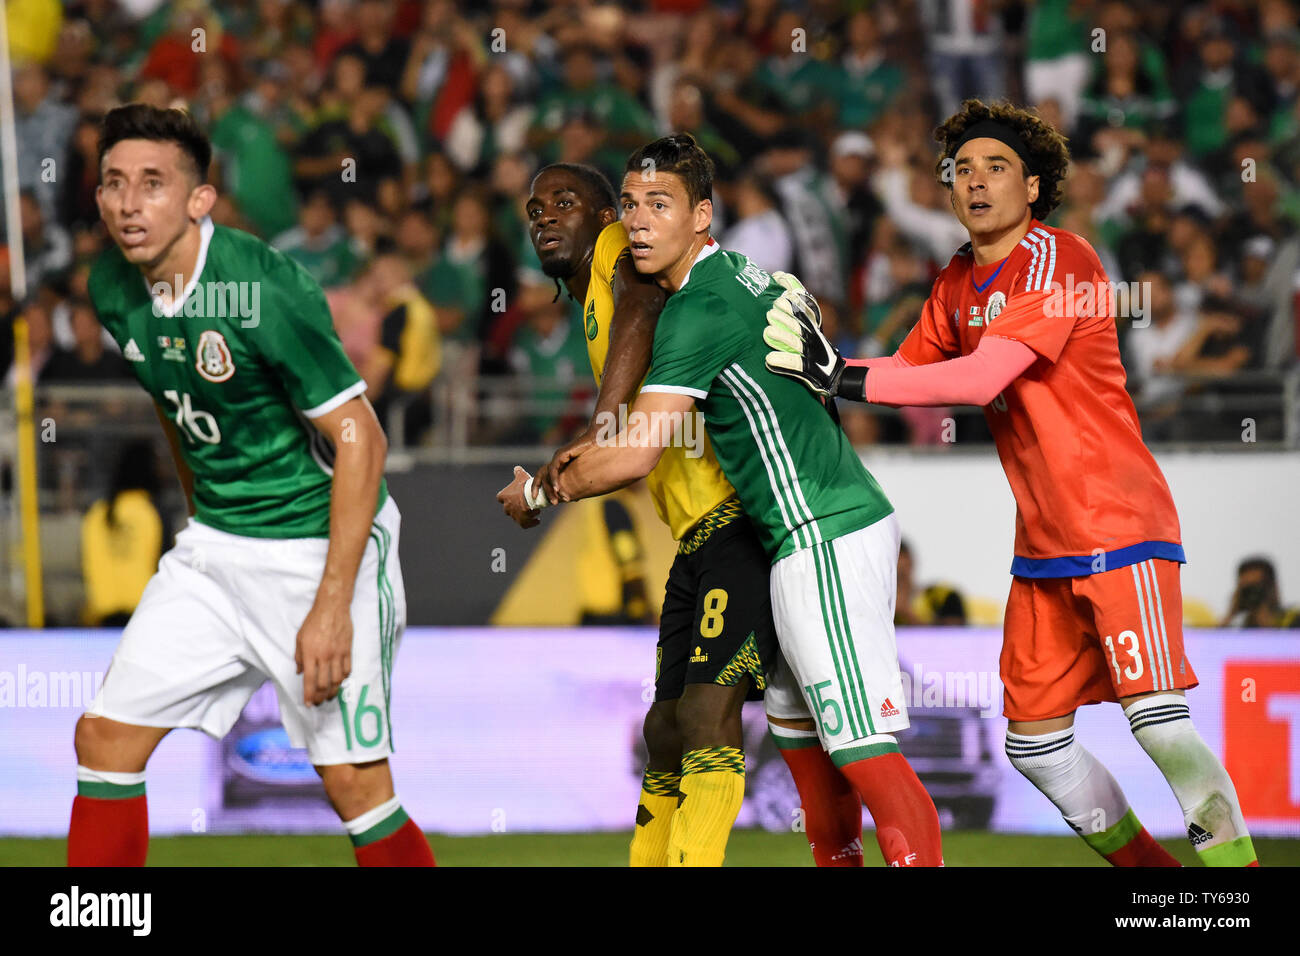 Jamaica forward Clayton Donaldson (8) is defended by Mexico defender Héctor Moreno (15) in front of the net on a corner kick during the second half of a 2016 Copa America Centenario Group A match at the Rose Bowl in Pasadena, California, on June 9, 2016. At left is Mexico midfielder Héctor Herrera and at right is Mexico goalkeeper Guillermo Ochoa. Mexico defeated Jamaica 2-0.     Photo by Michael Owen Baker/UPI Stock Photo